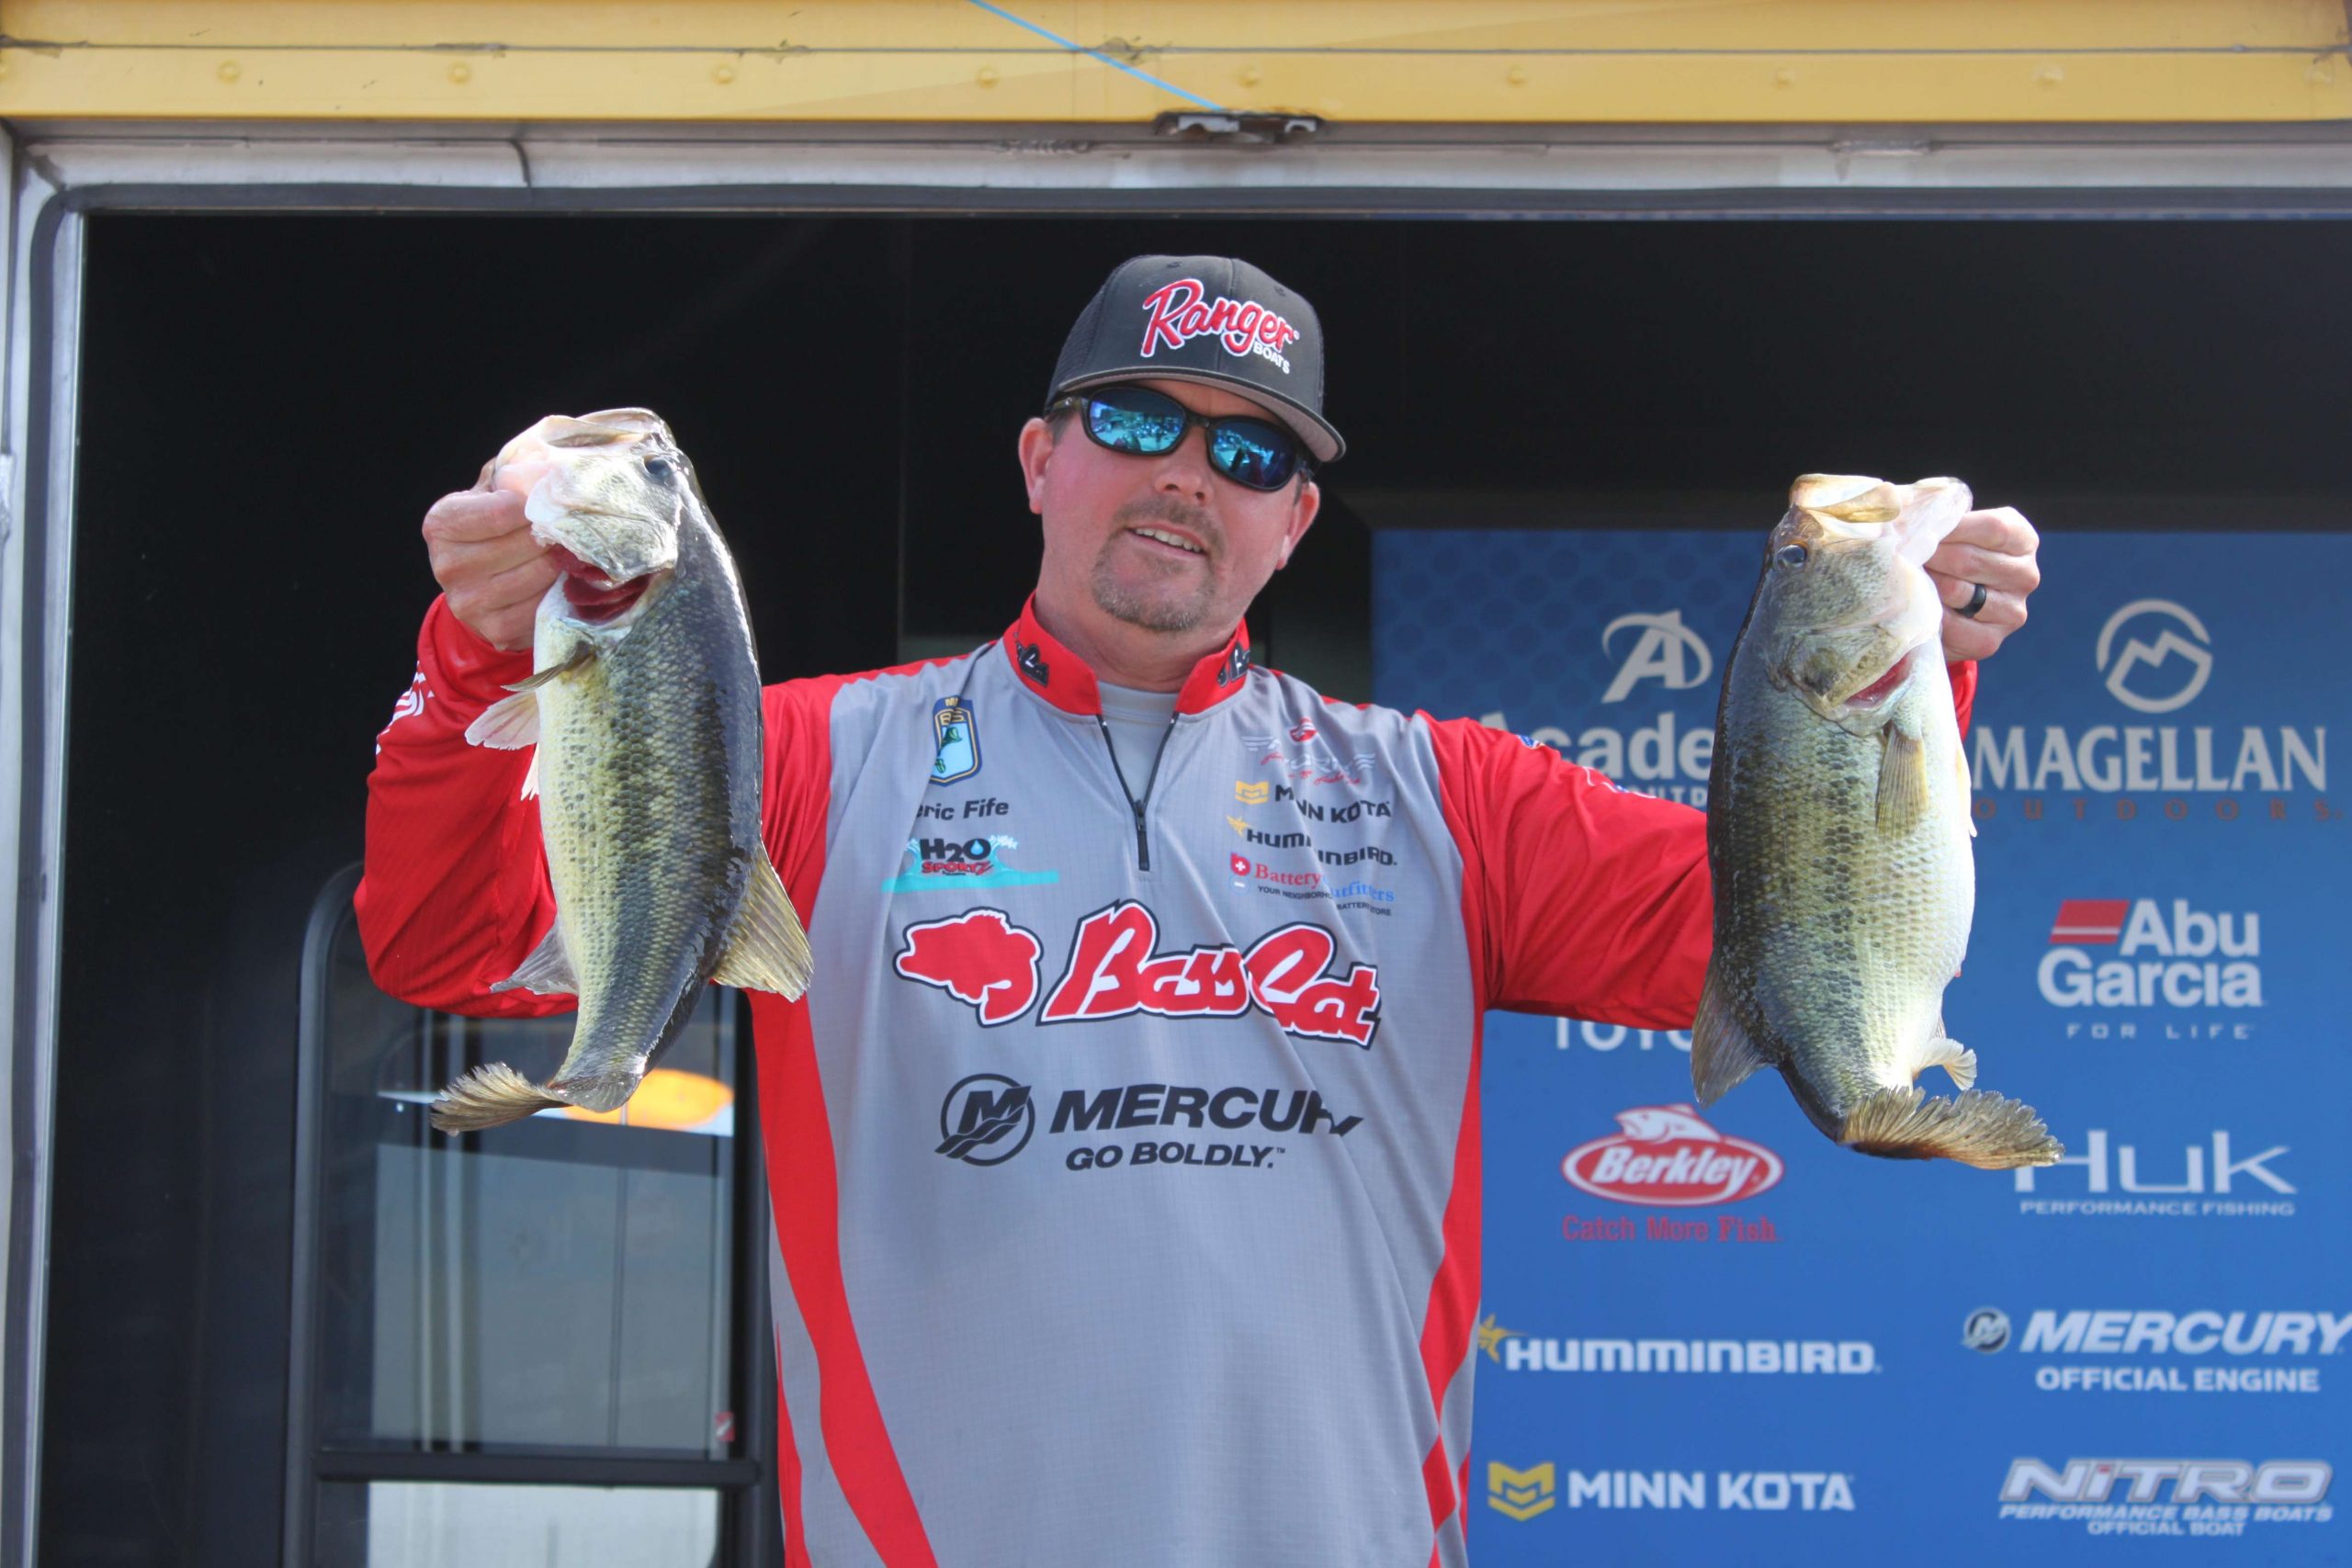 Team Arkansas' Deric Fife is in eighth place in the boater division with 32-13.
